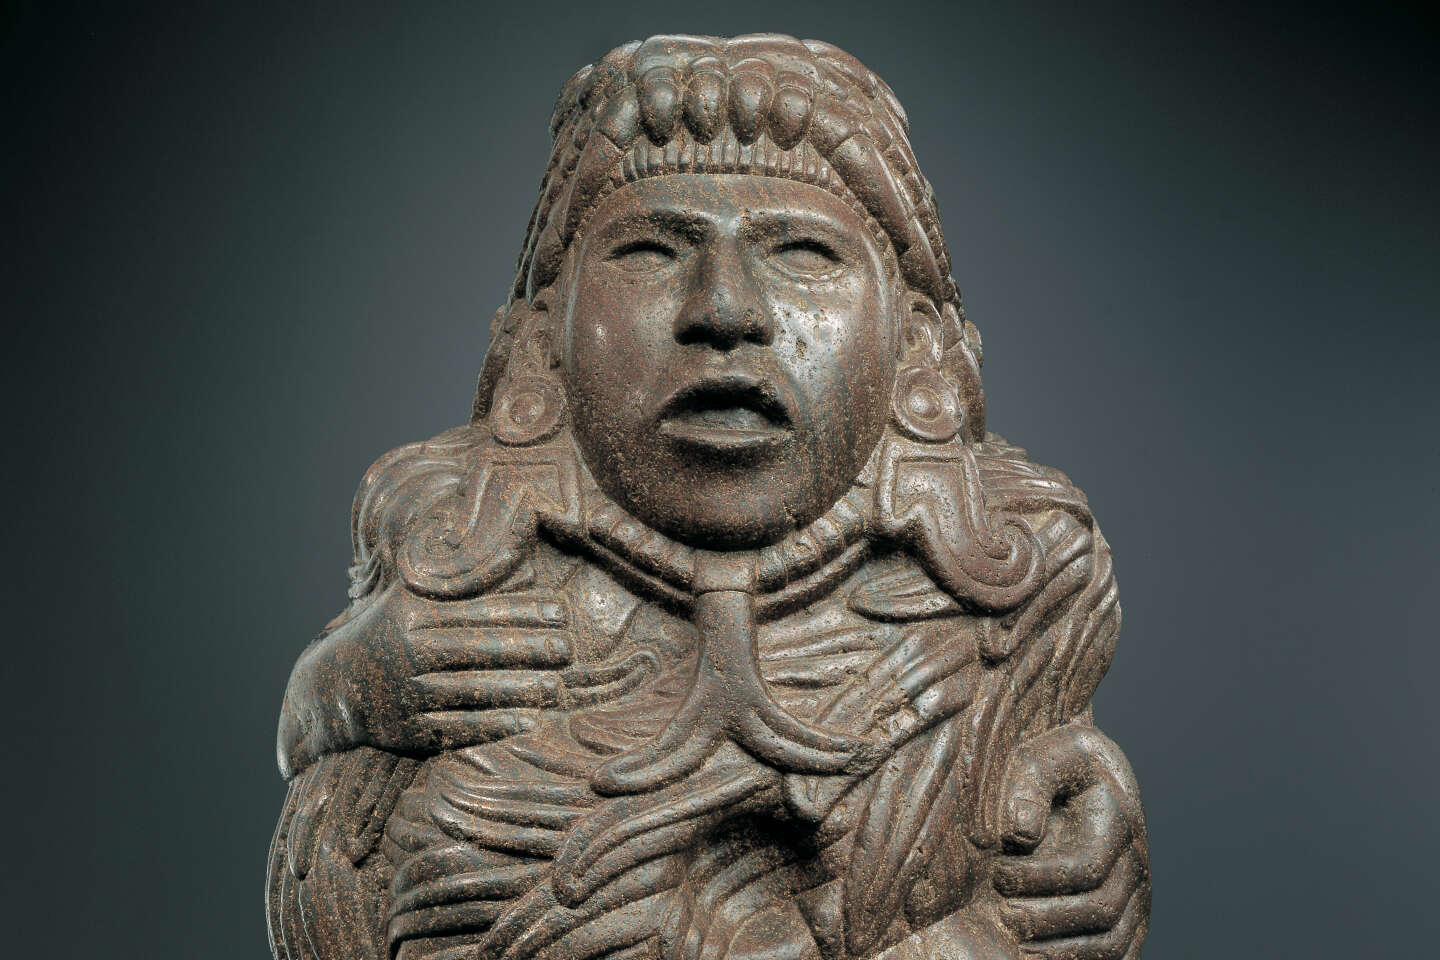 At the Paris Quai Branly Museum, the fascinating cosmovision of the Mexicas